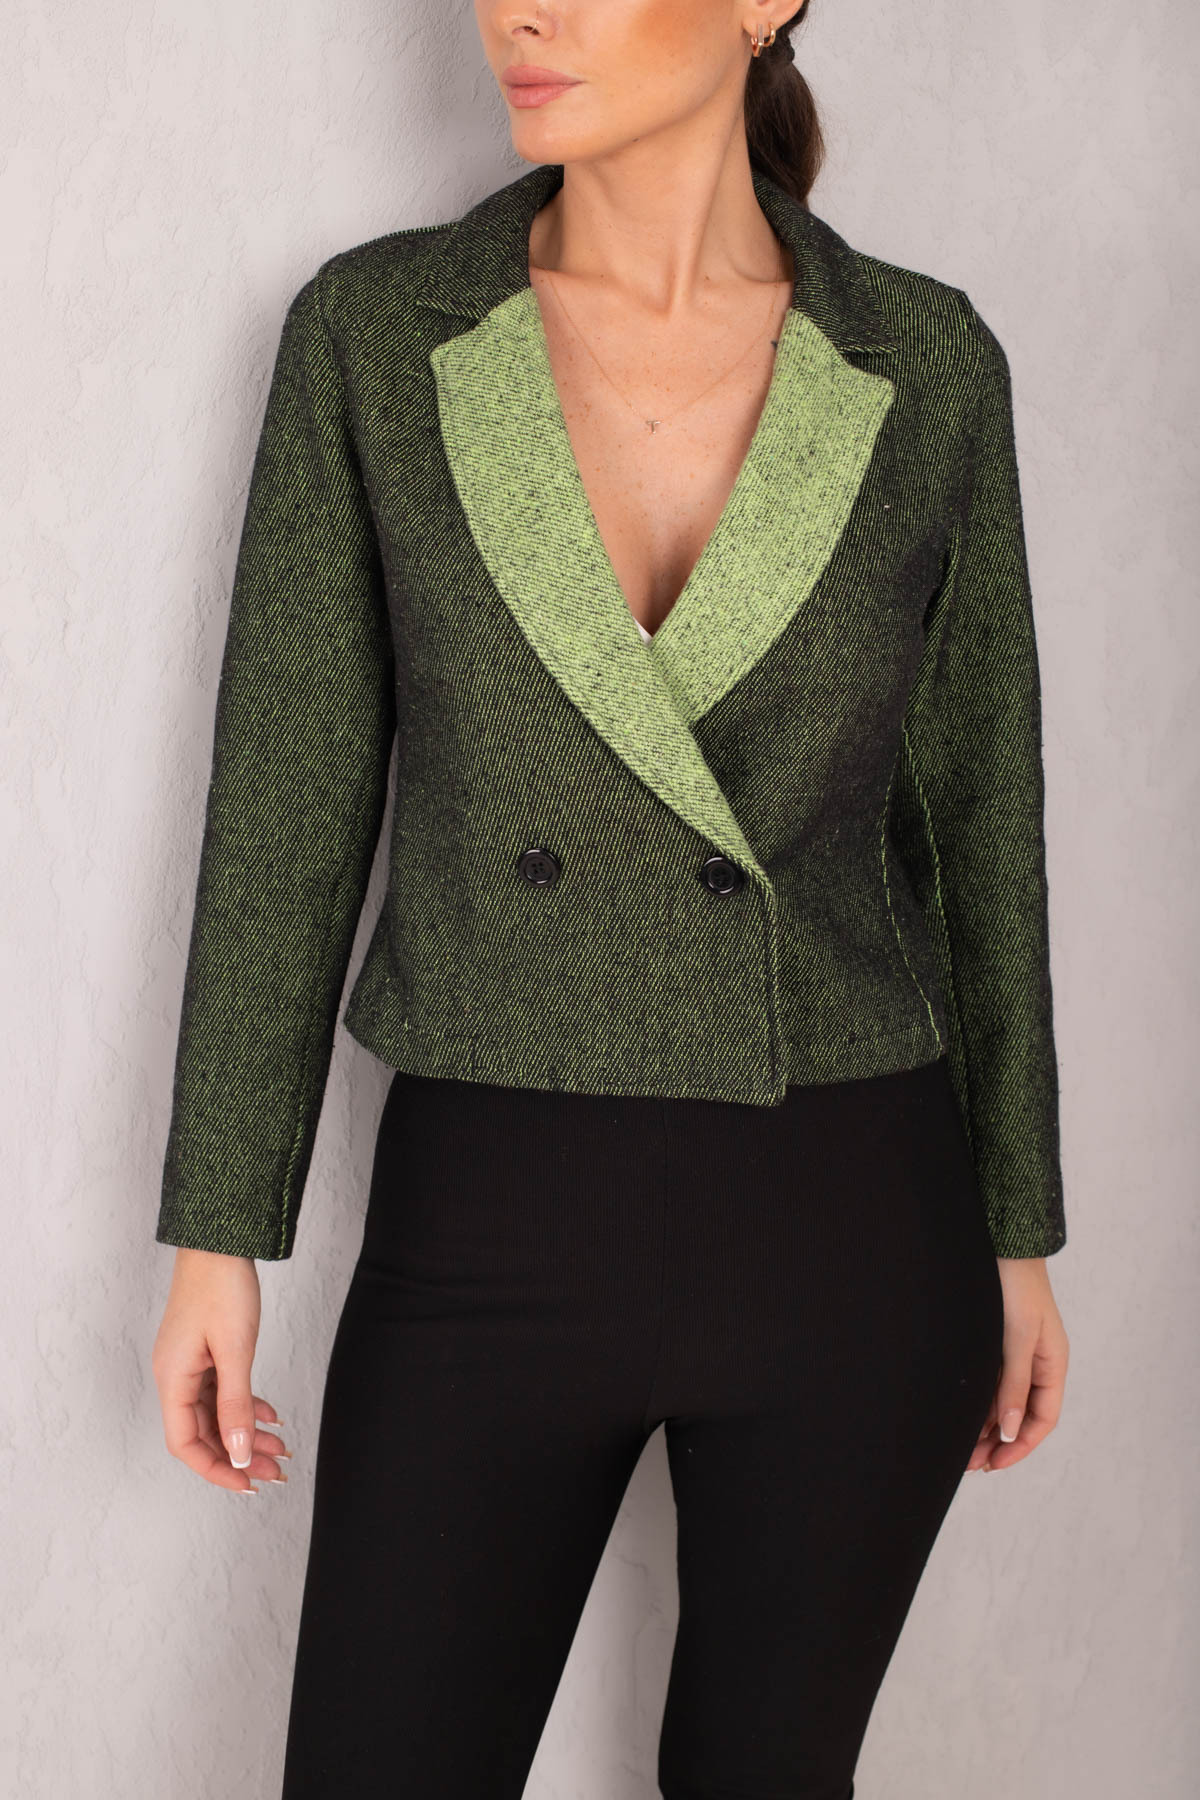 Levně armonika Women's Pistachio Green Double Breasted Collar Two Color Stitched Crop Jacket